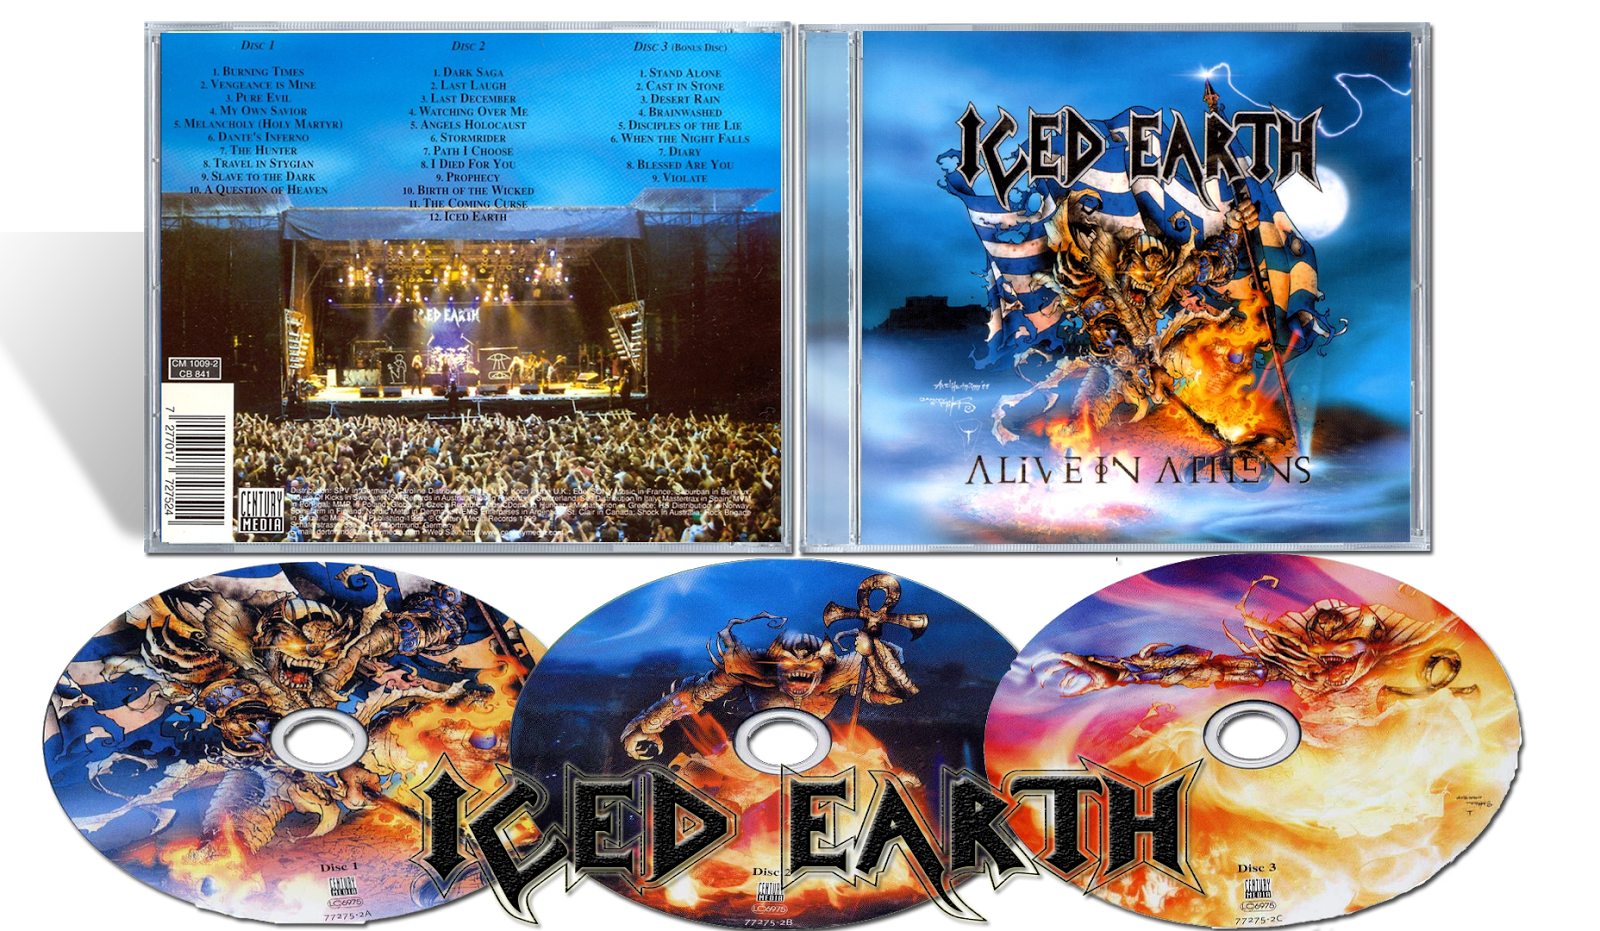 Iced Earth l Alive In Athens l Audio 1999